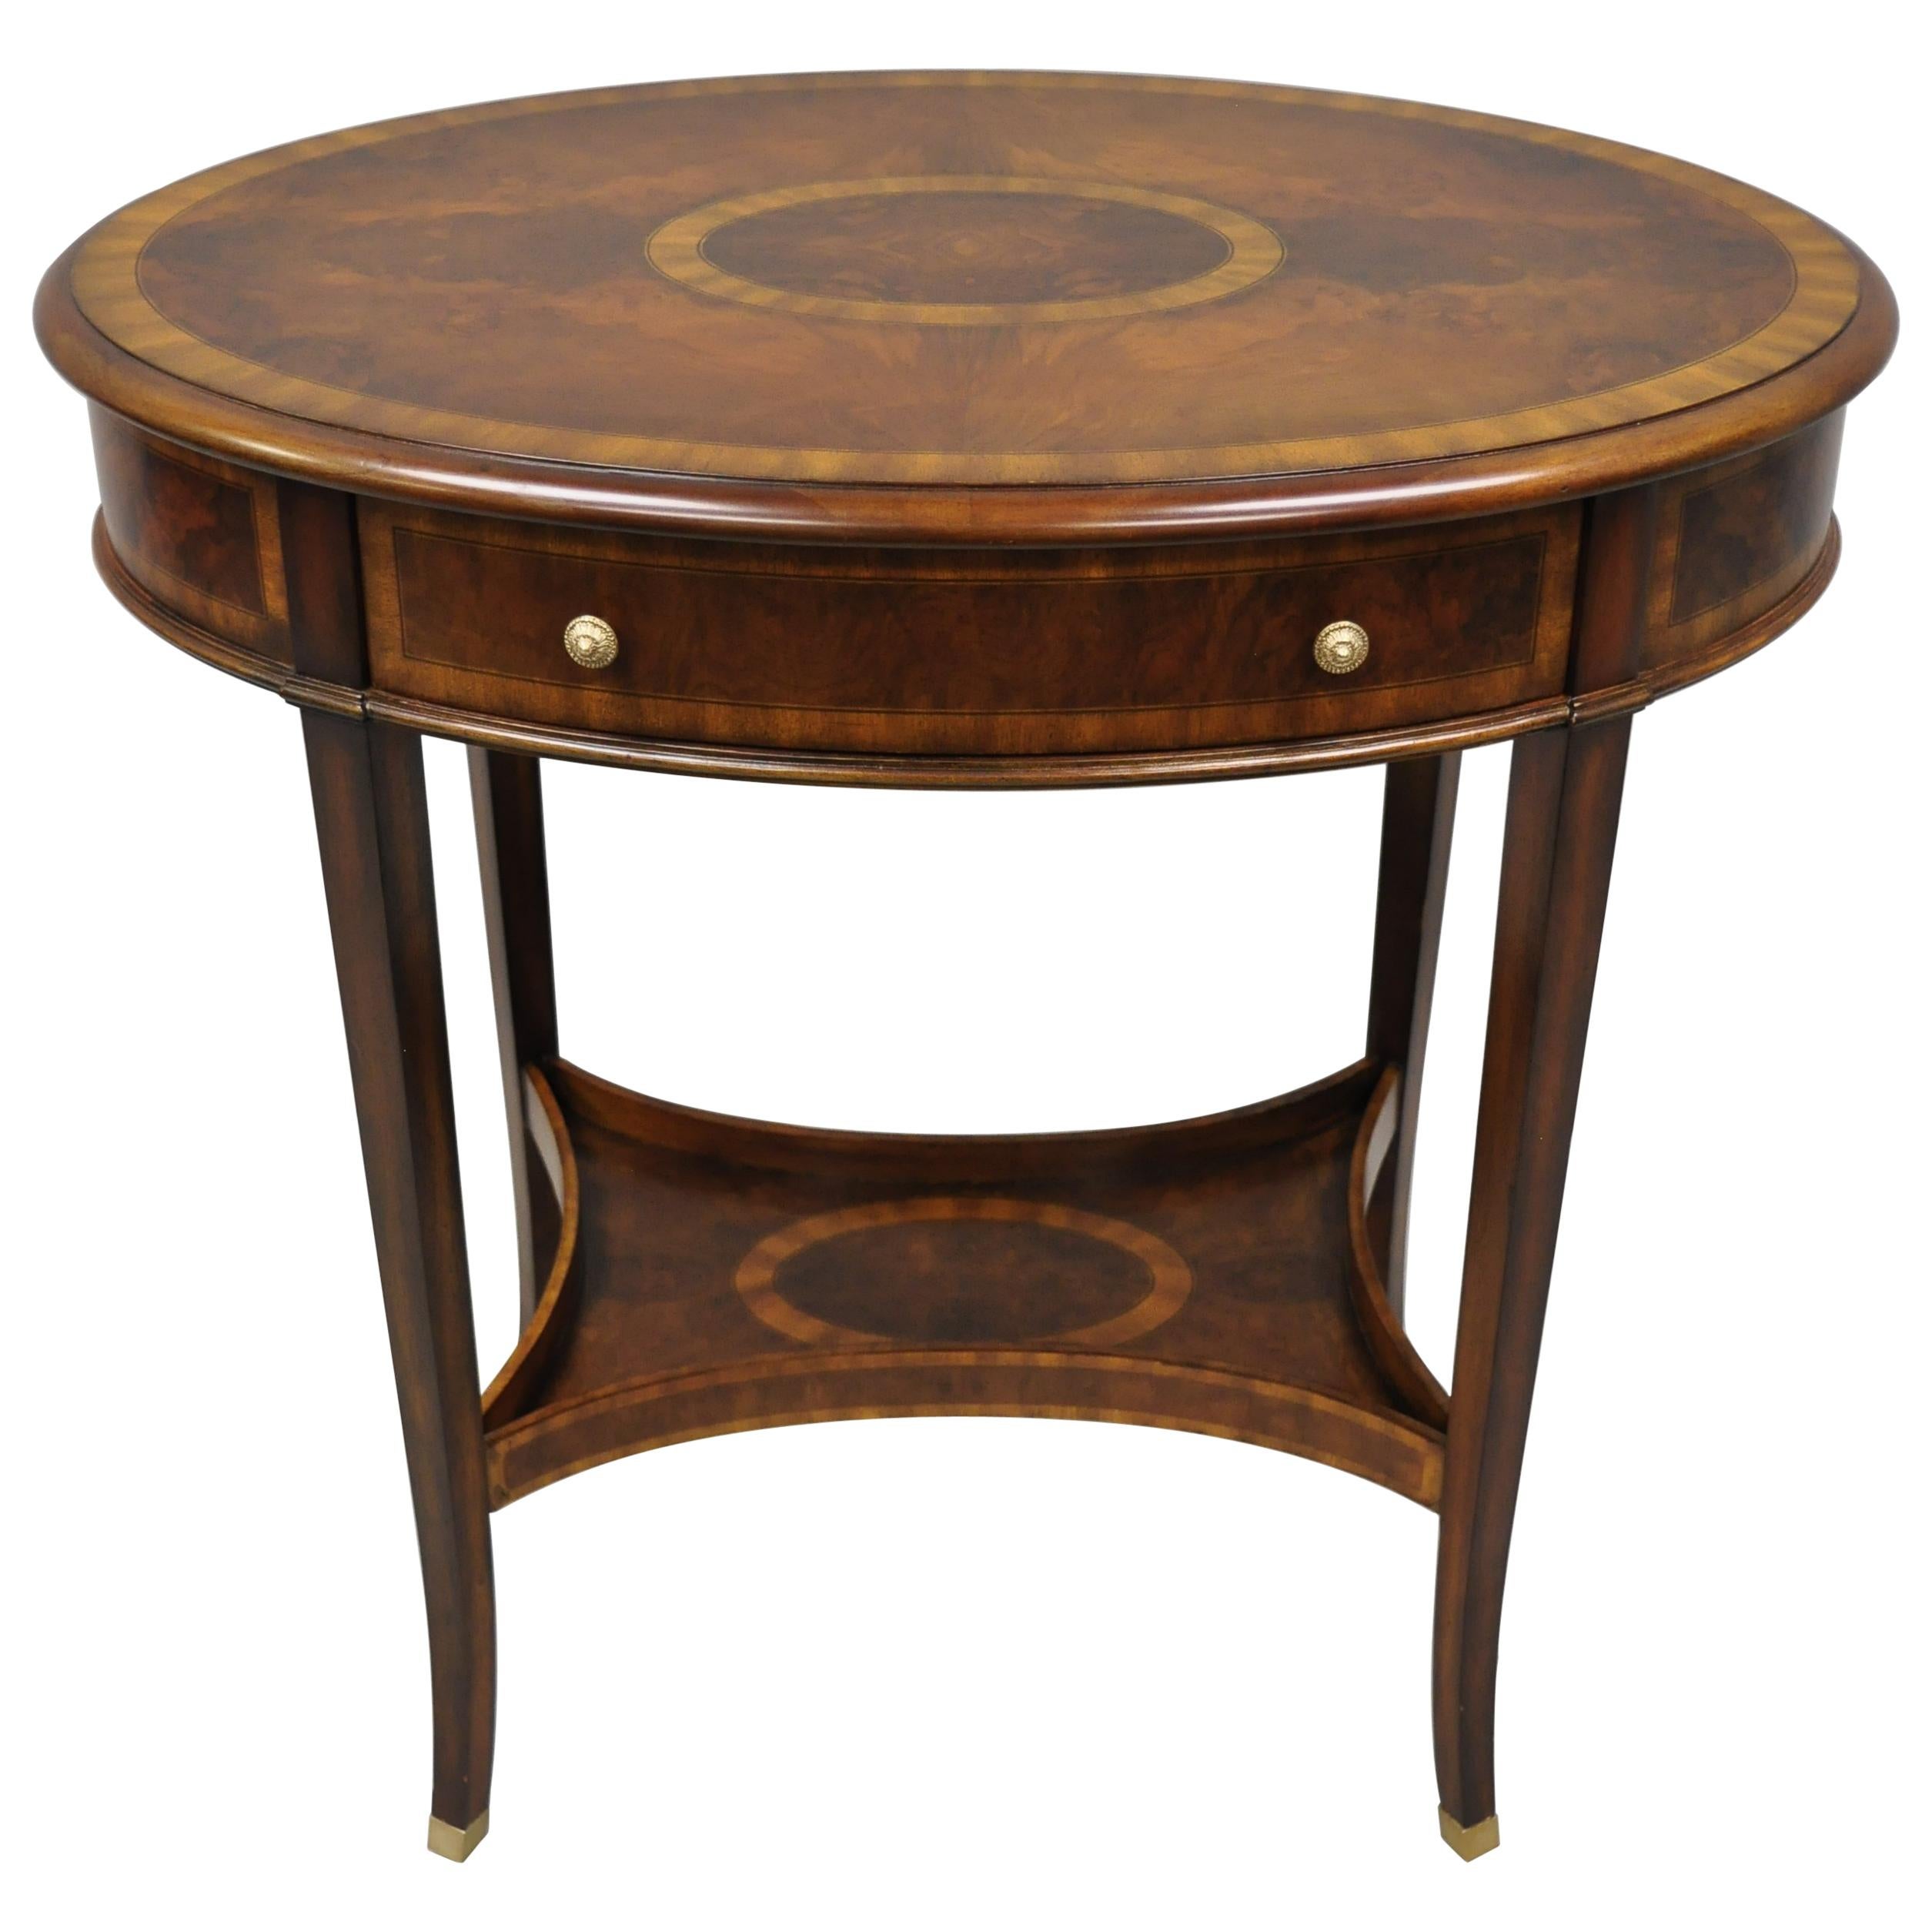 Maitland Smith Mahogany Oval Inlaid One Drawer Occasional Accent Side Table